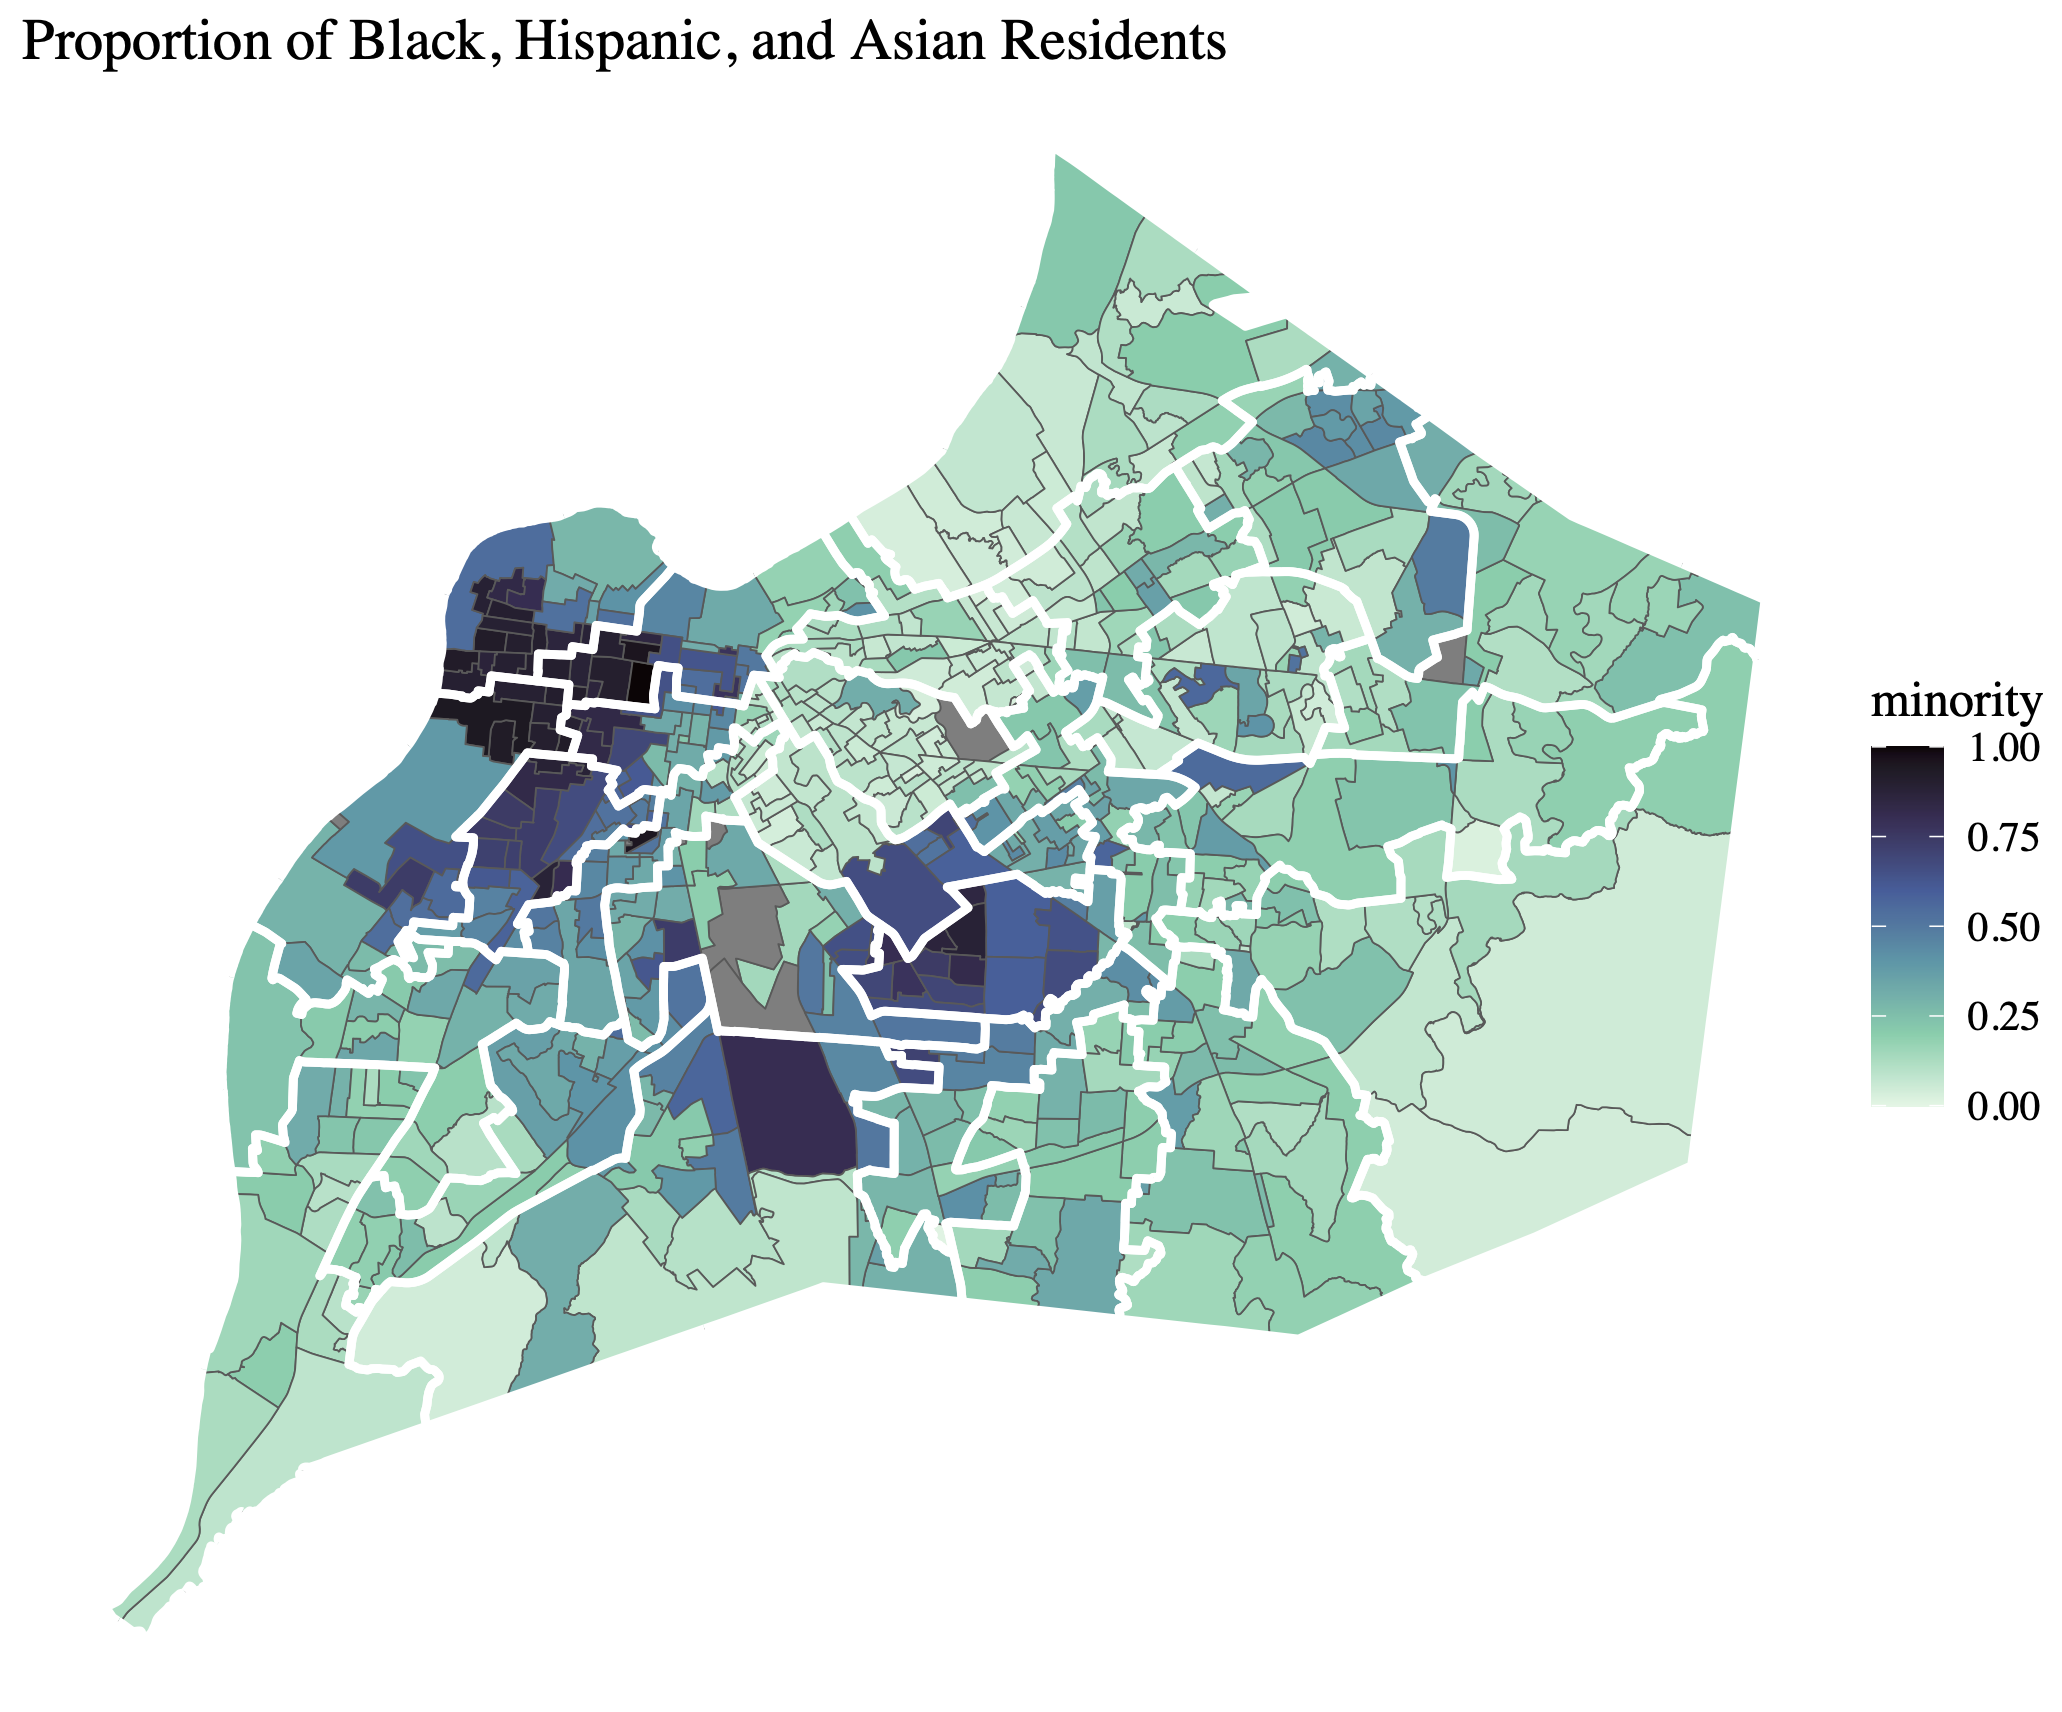 Figure 1: This map shows the proportion of Black, Hispanic, and Asian residents within each precinct in Louisville. Darker shades of blue indicate a higher proportion of minorities, including Black, Hispanic, and Asian populations, living in the precinct compared to White population. The thinner black lines represent precinct boundaries, while the thicker white lines represent current district boundaries.